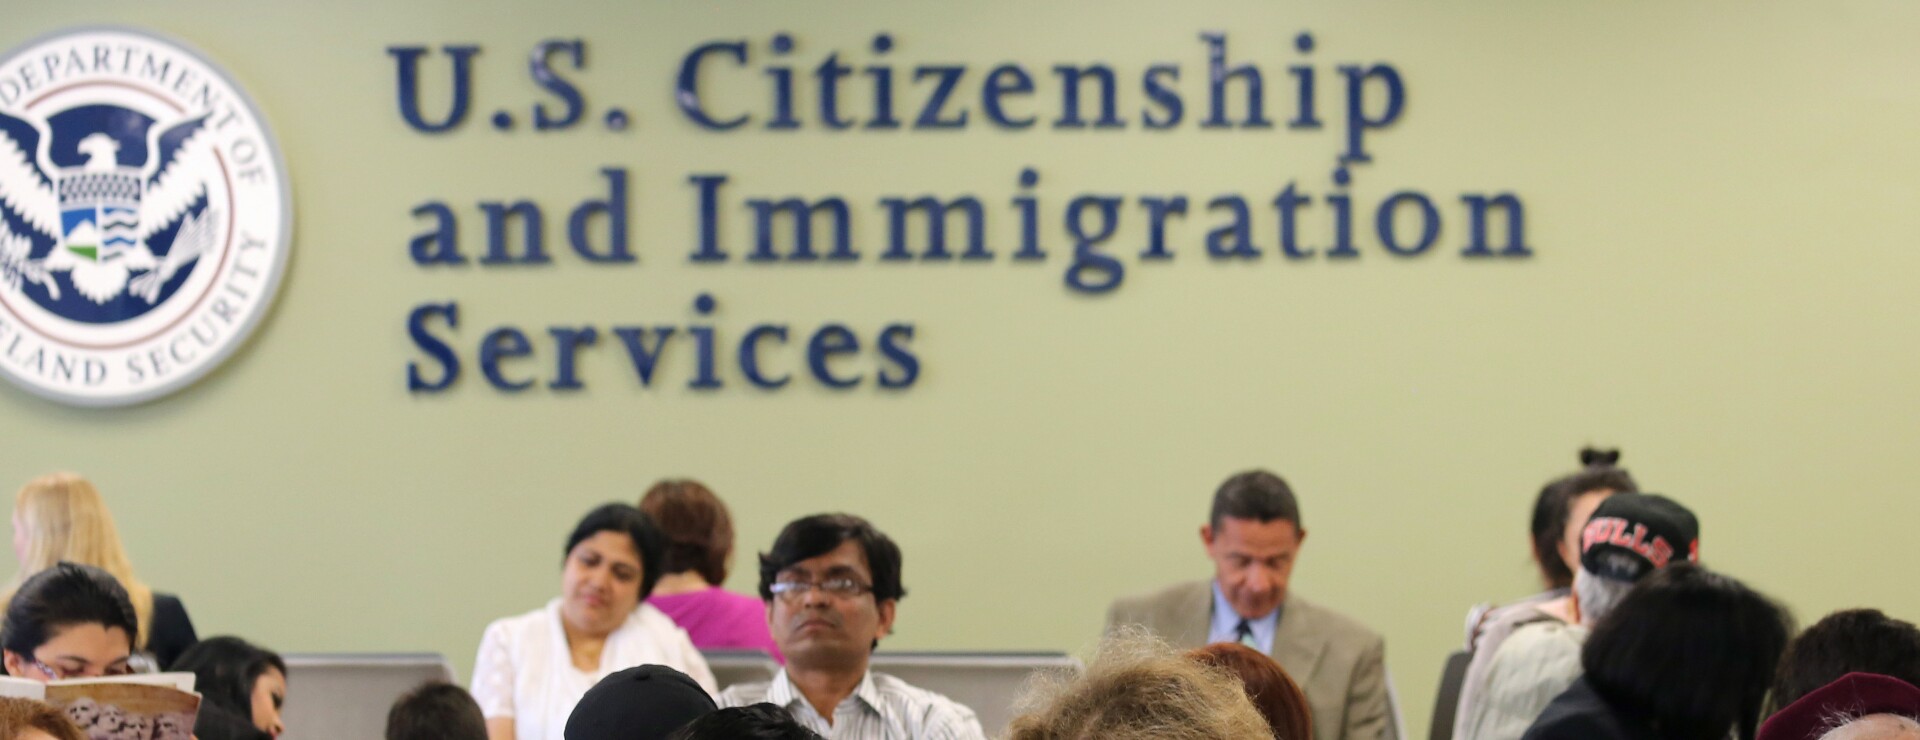 US Citizenship and Immigration Services has been asked to extend the work eligibility period for people with pending renewals on their permits to work in the states. Photographer: John Moore/Getty Images